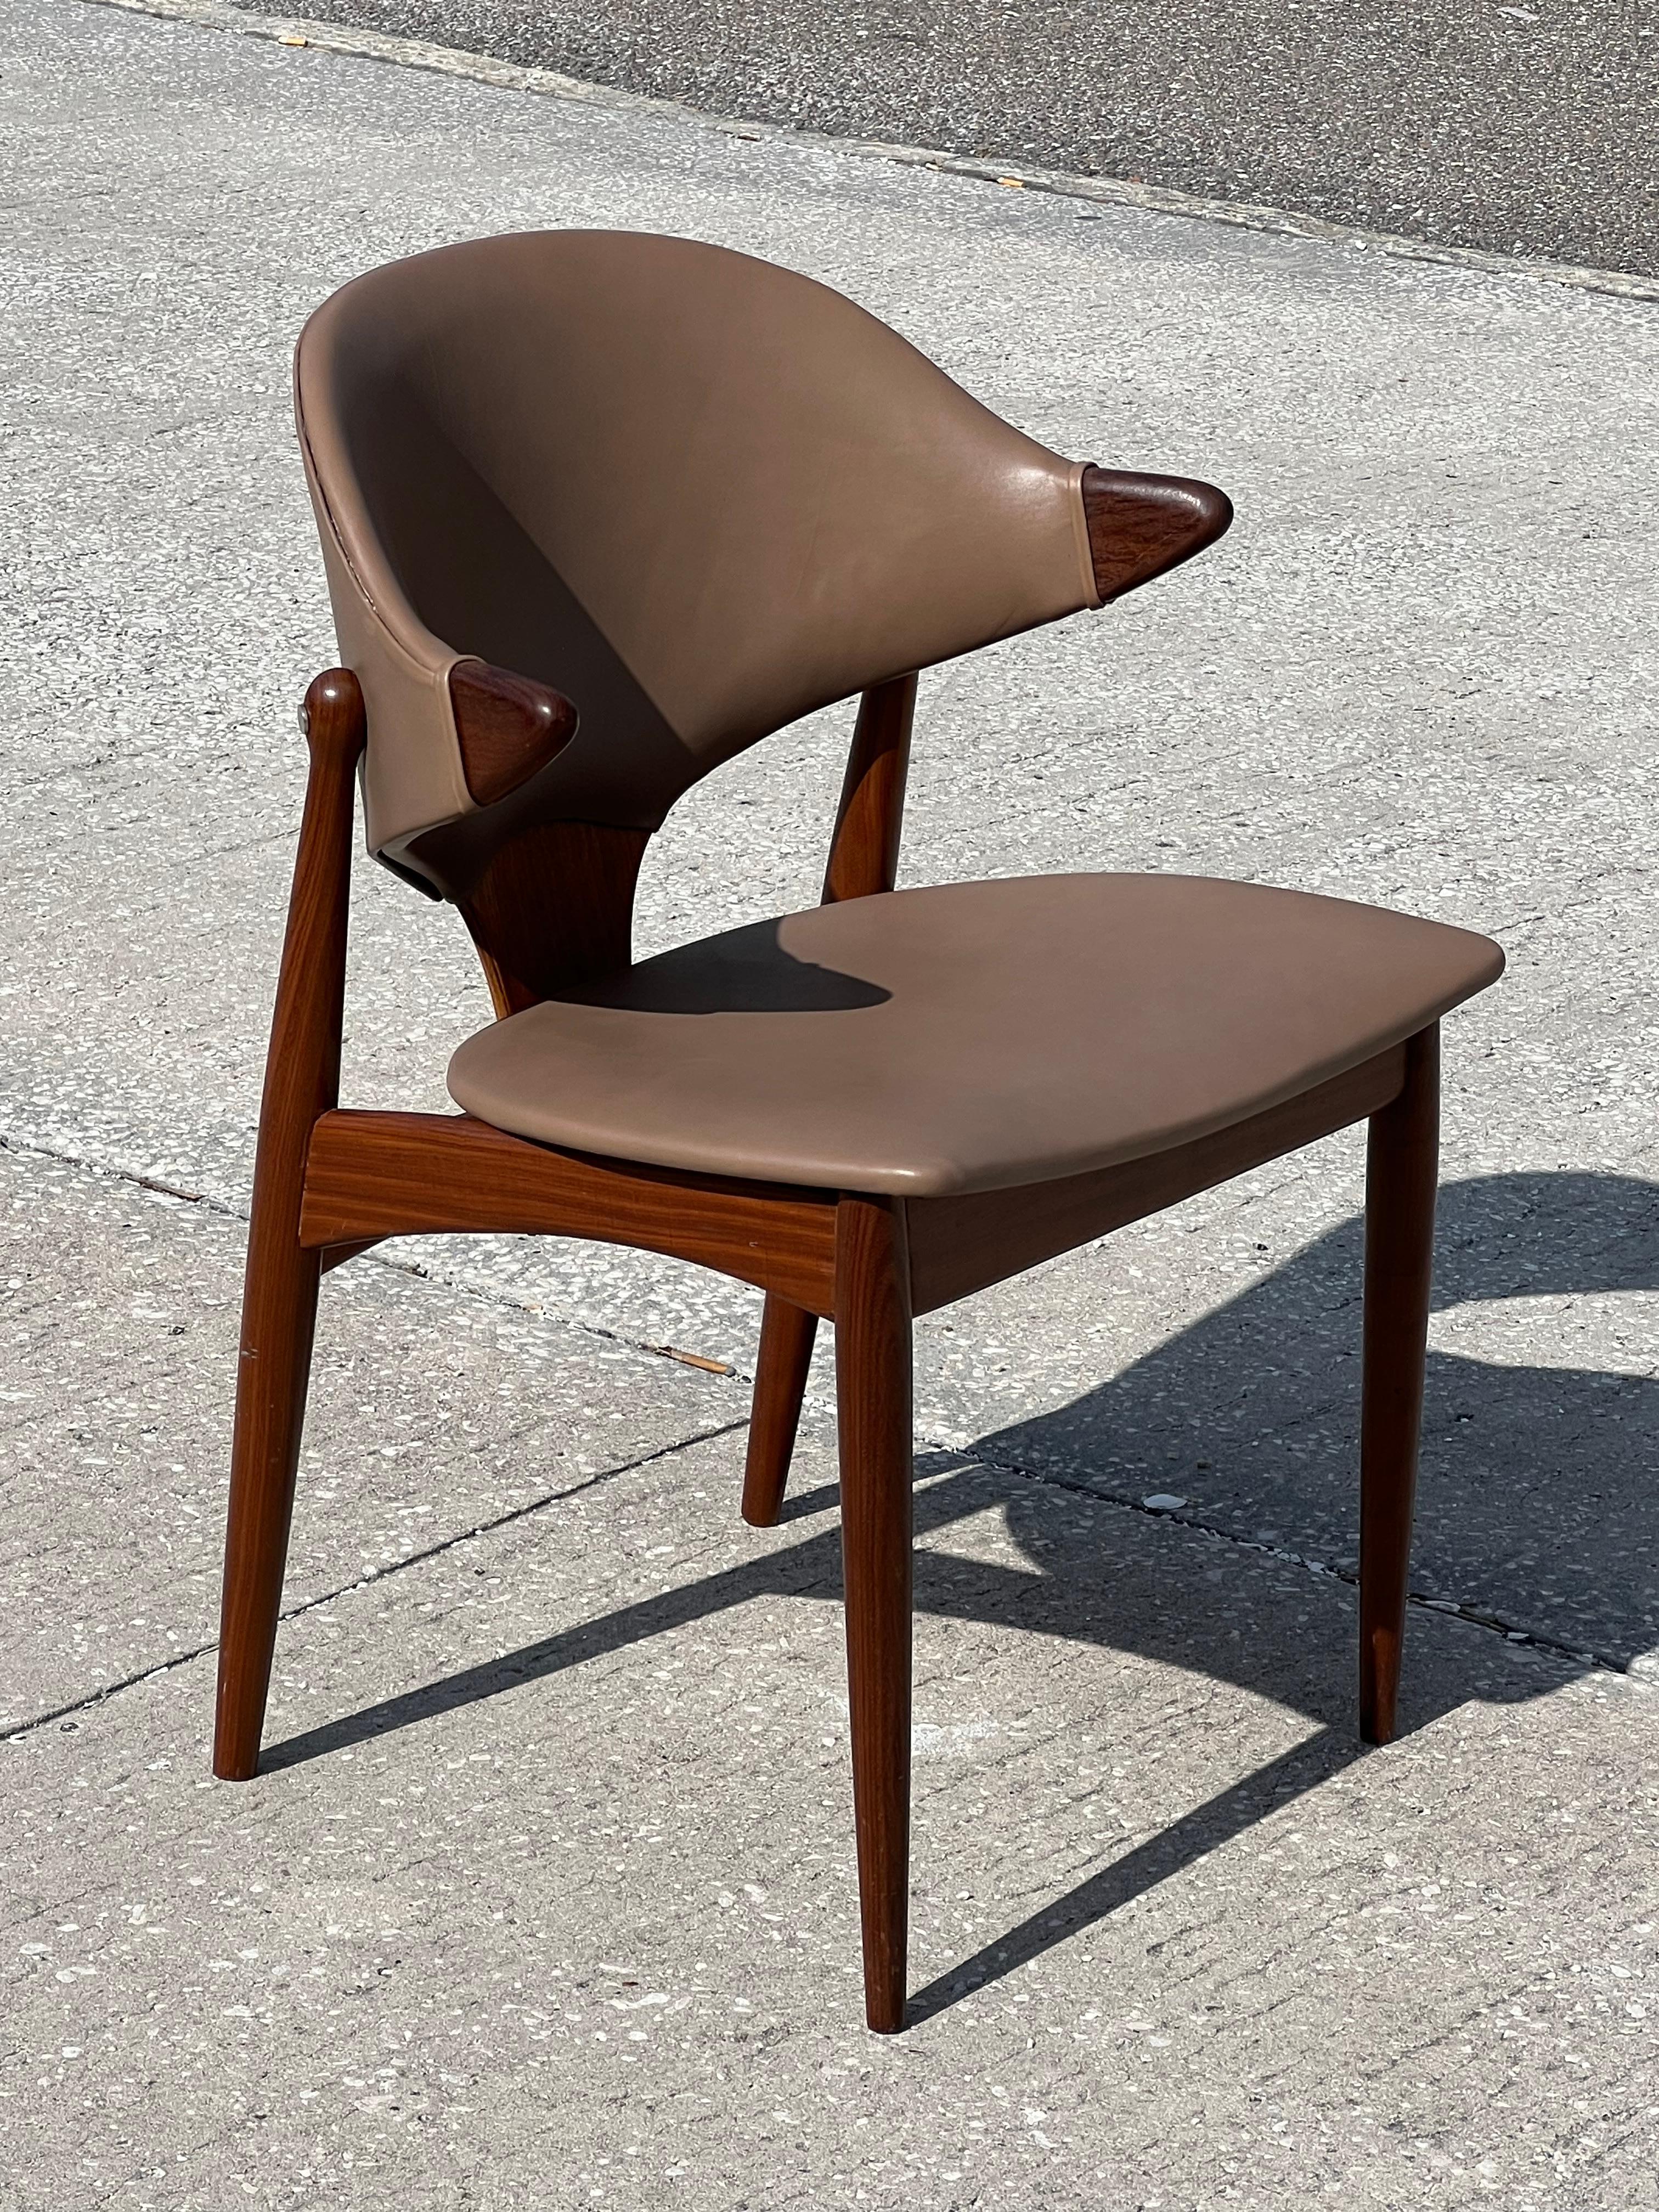 Classic Arne Vodder Leather And Teak Chair For Mahjongg Holland 1964 For Sale 3